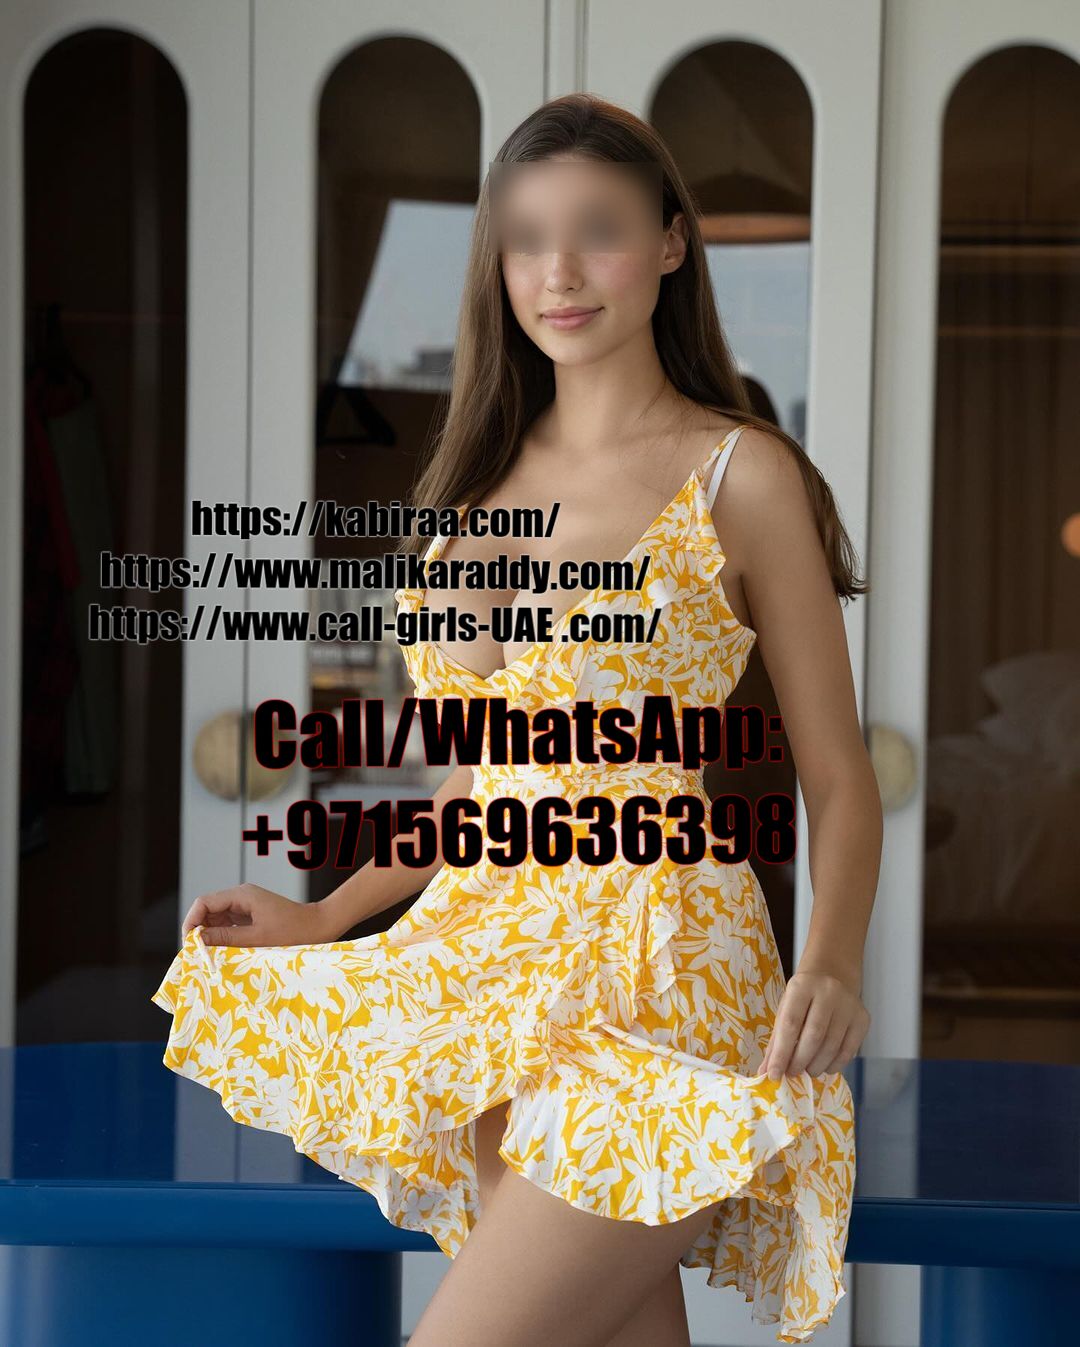 Top-rated Escorts in Sharjah ￥_+971569636398 _₳♞ Call Now! Blank Meme Template